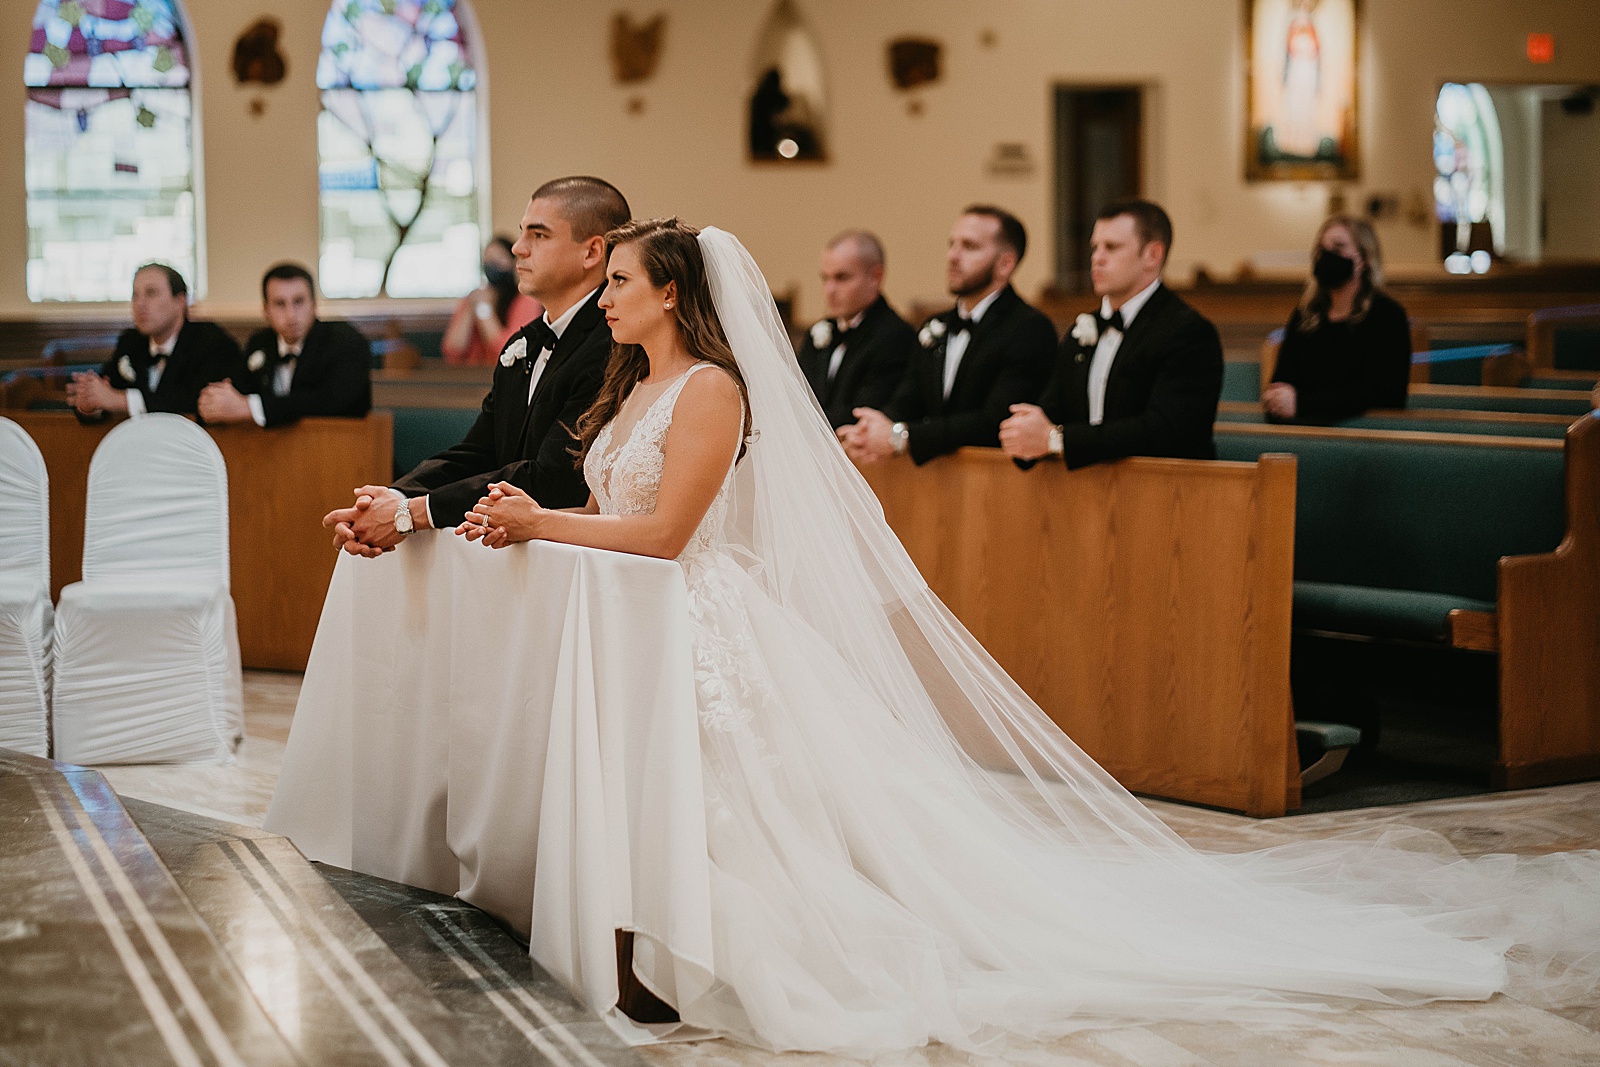 Romantic Church Wedding During COVID-19 captured by West Palm Beach Wedding Photographer, Krystal Capone Photography